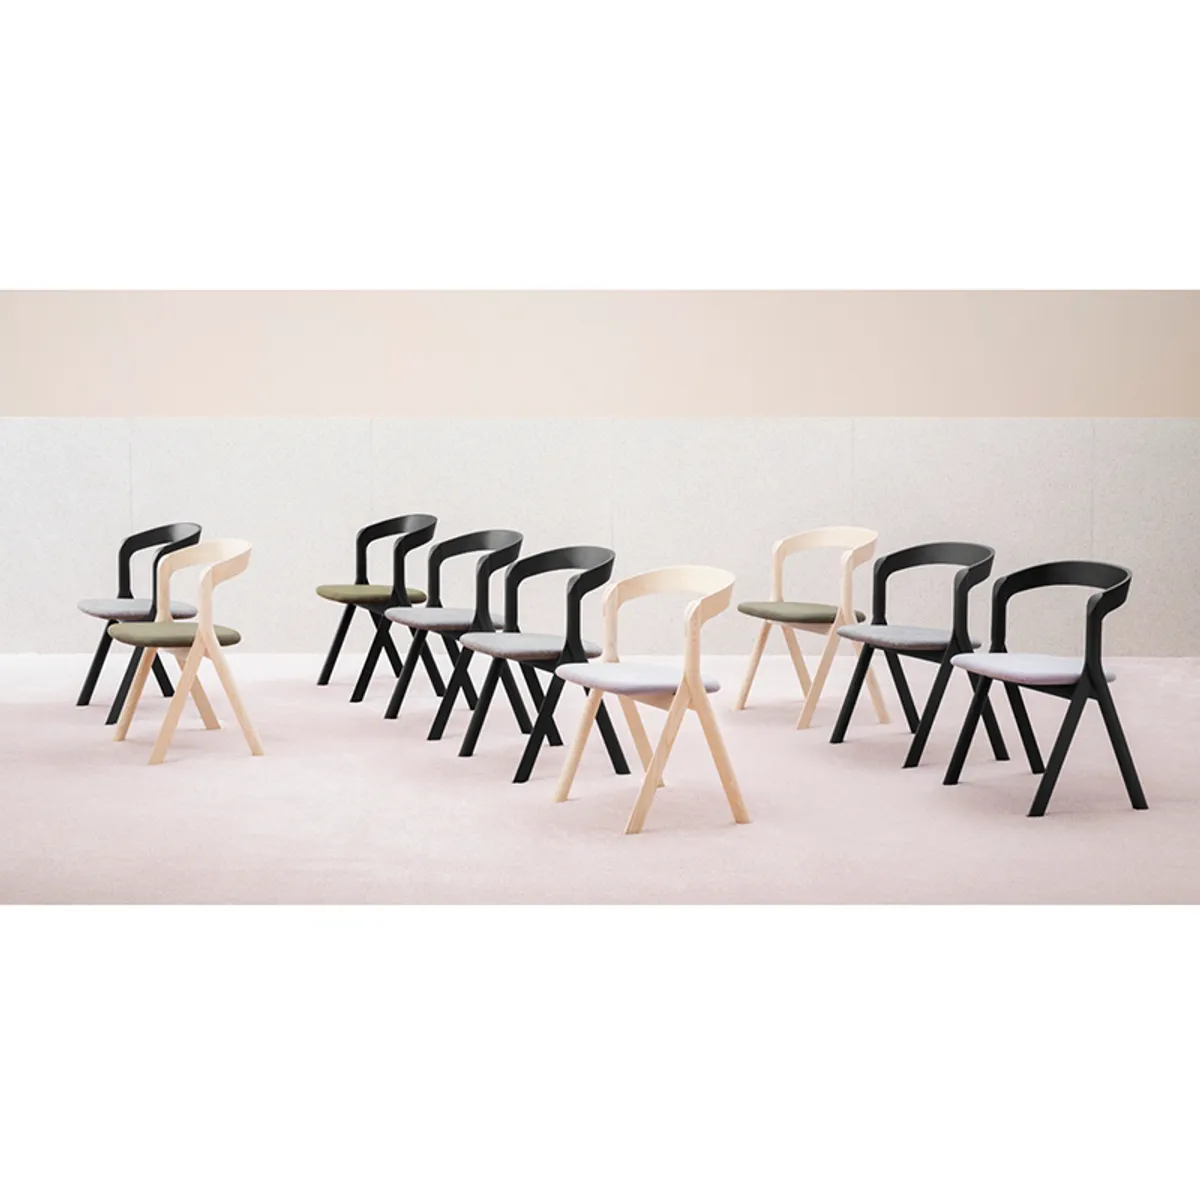 Diverge Chair Wooden Furniture For Restaurants And Educational Settings 414